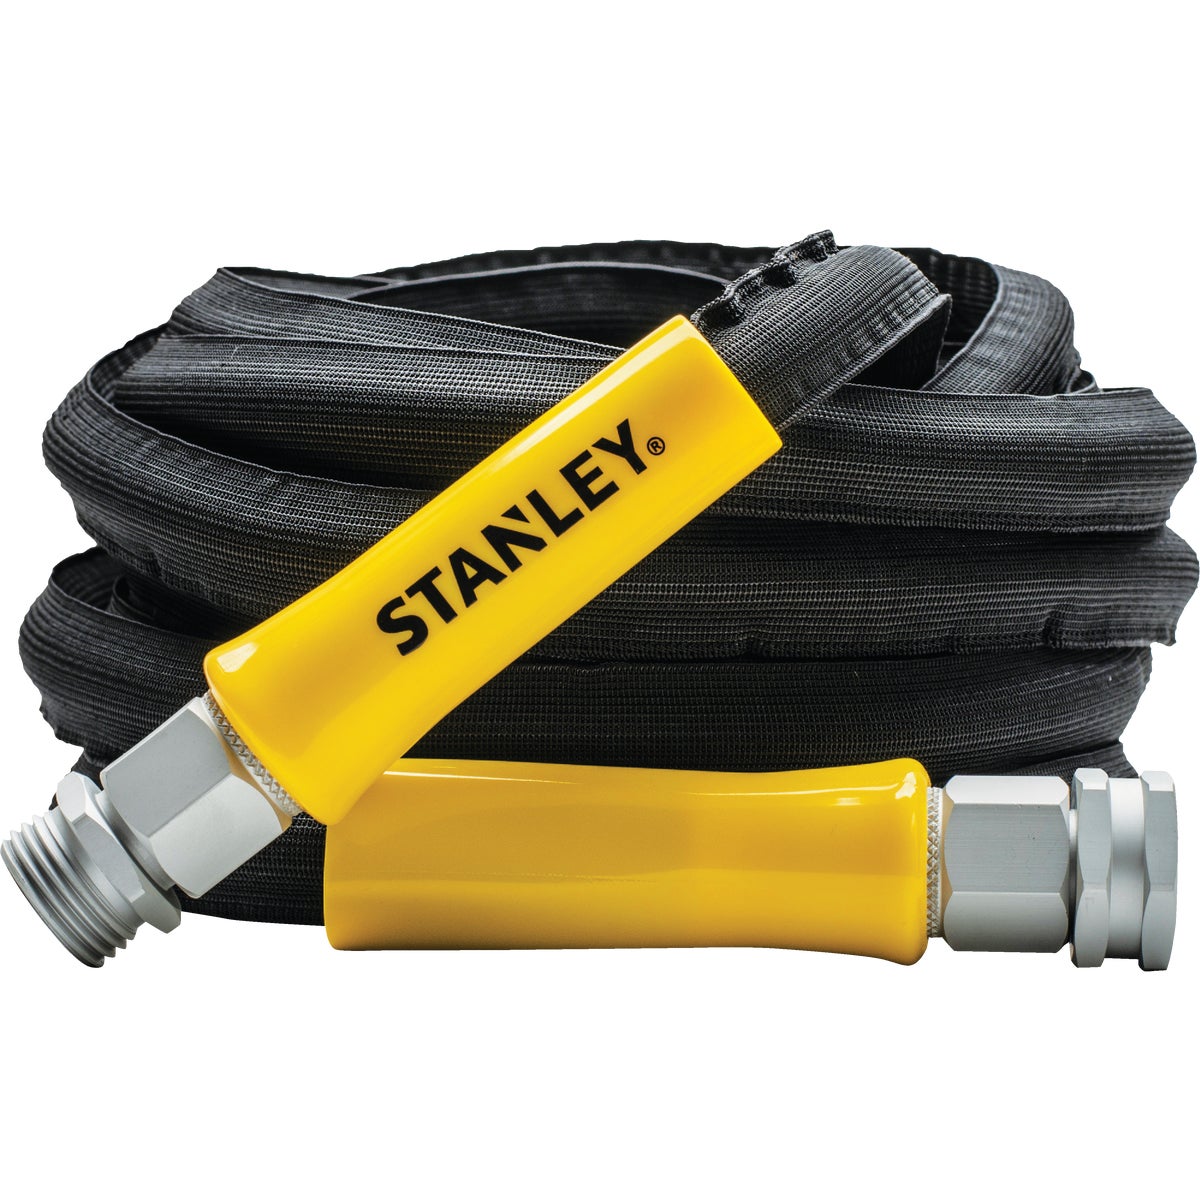 Item 705267, Expandable heavy-duty hose. 25 feet when not in use, expands to 50 feet.